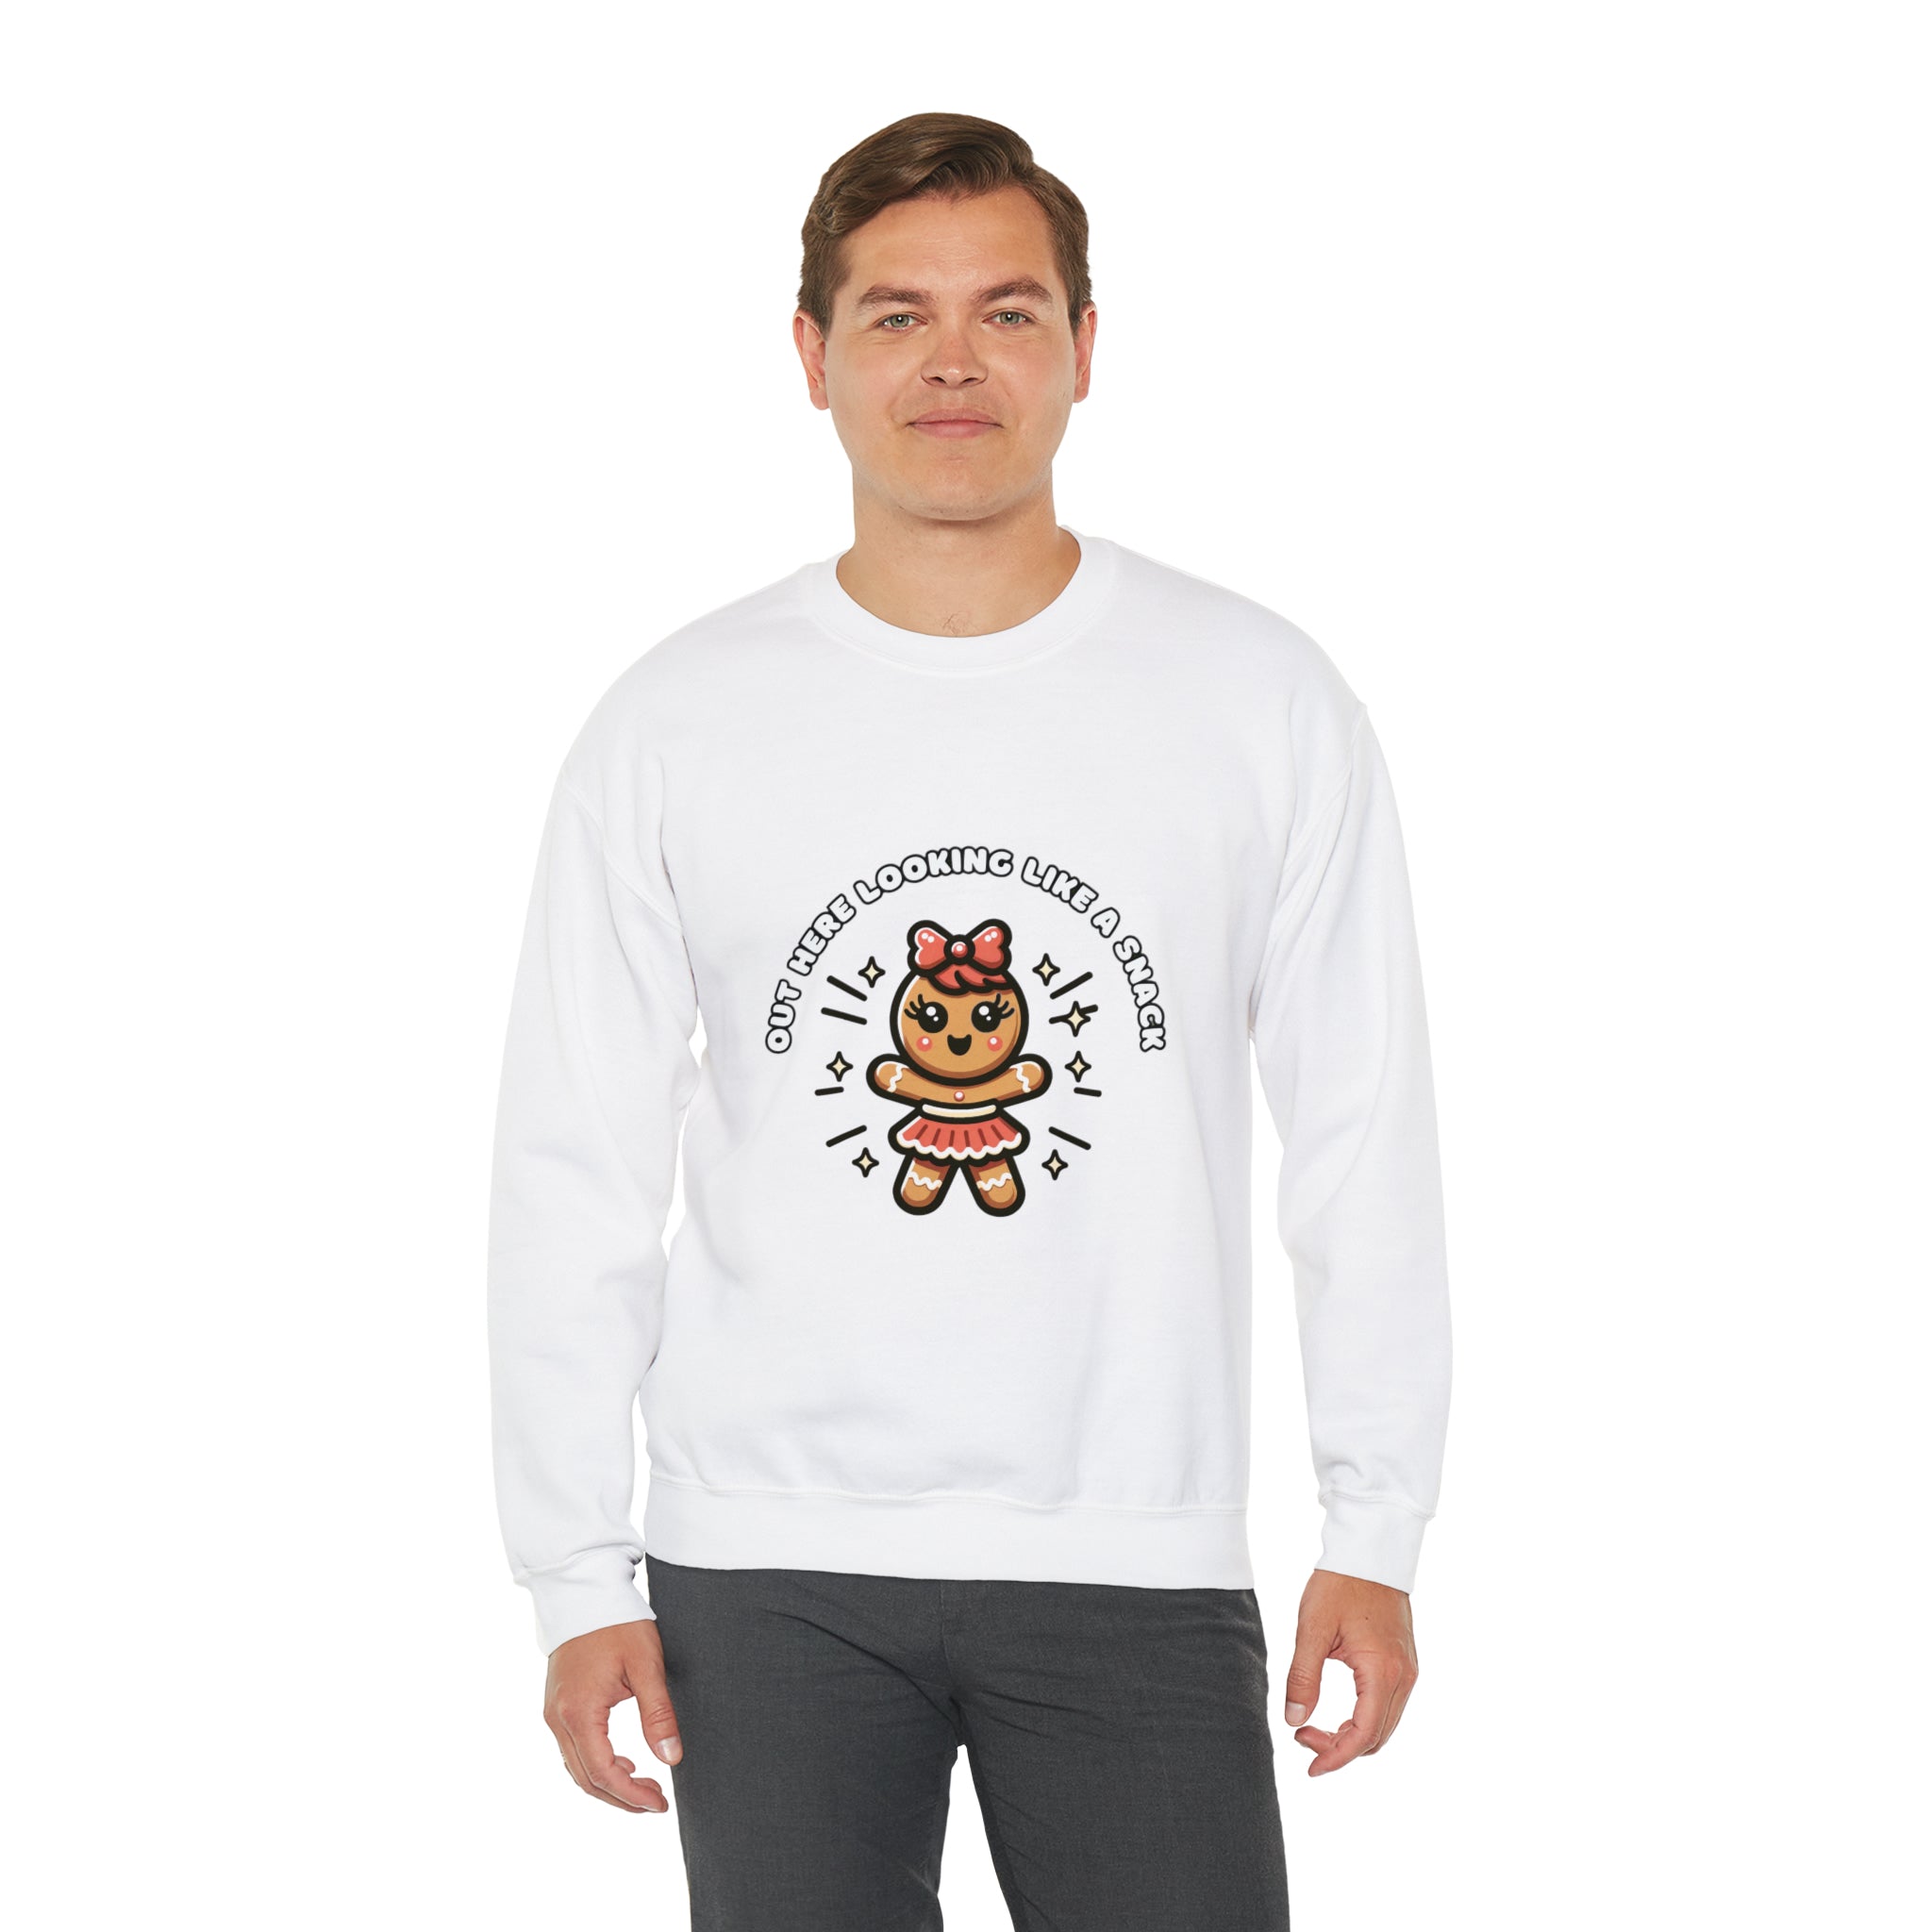 Out Here Looking Like a Snack Gingerbread Sweater